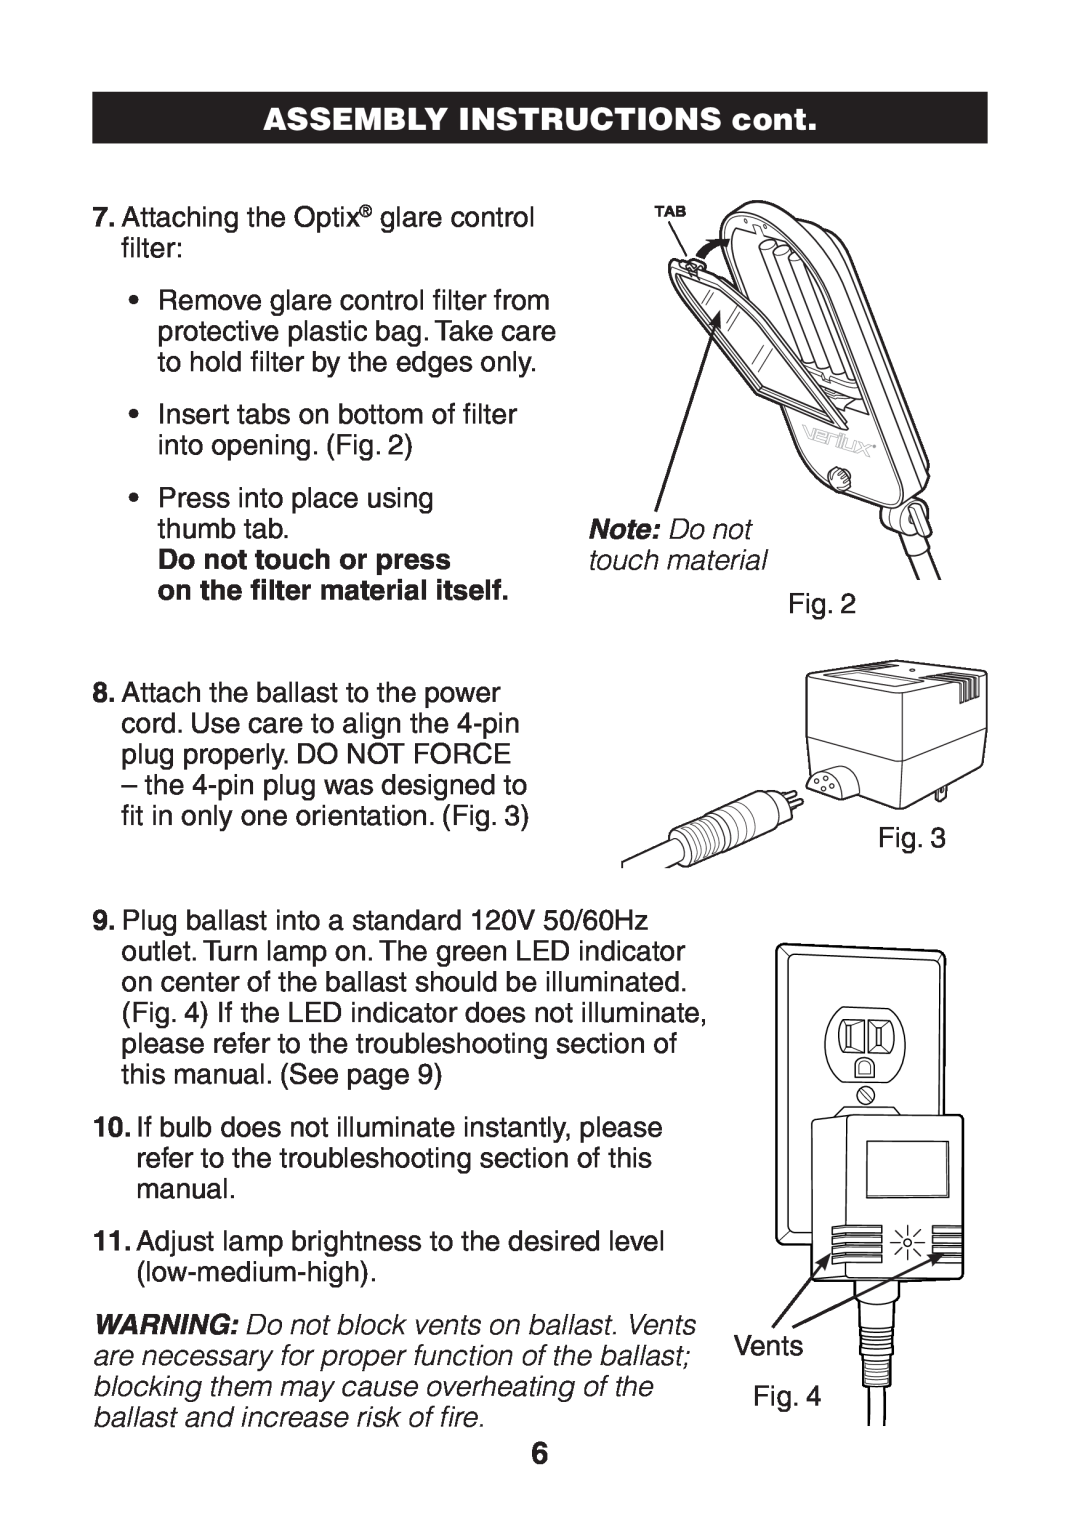 Verilux VF03 ASSEMBLY INSTRUCTIONS cont, Note Do not, Do not touch or press, touch material, on the ﬁlter material itself 